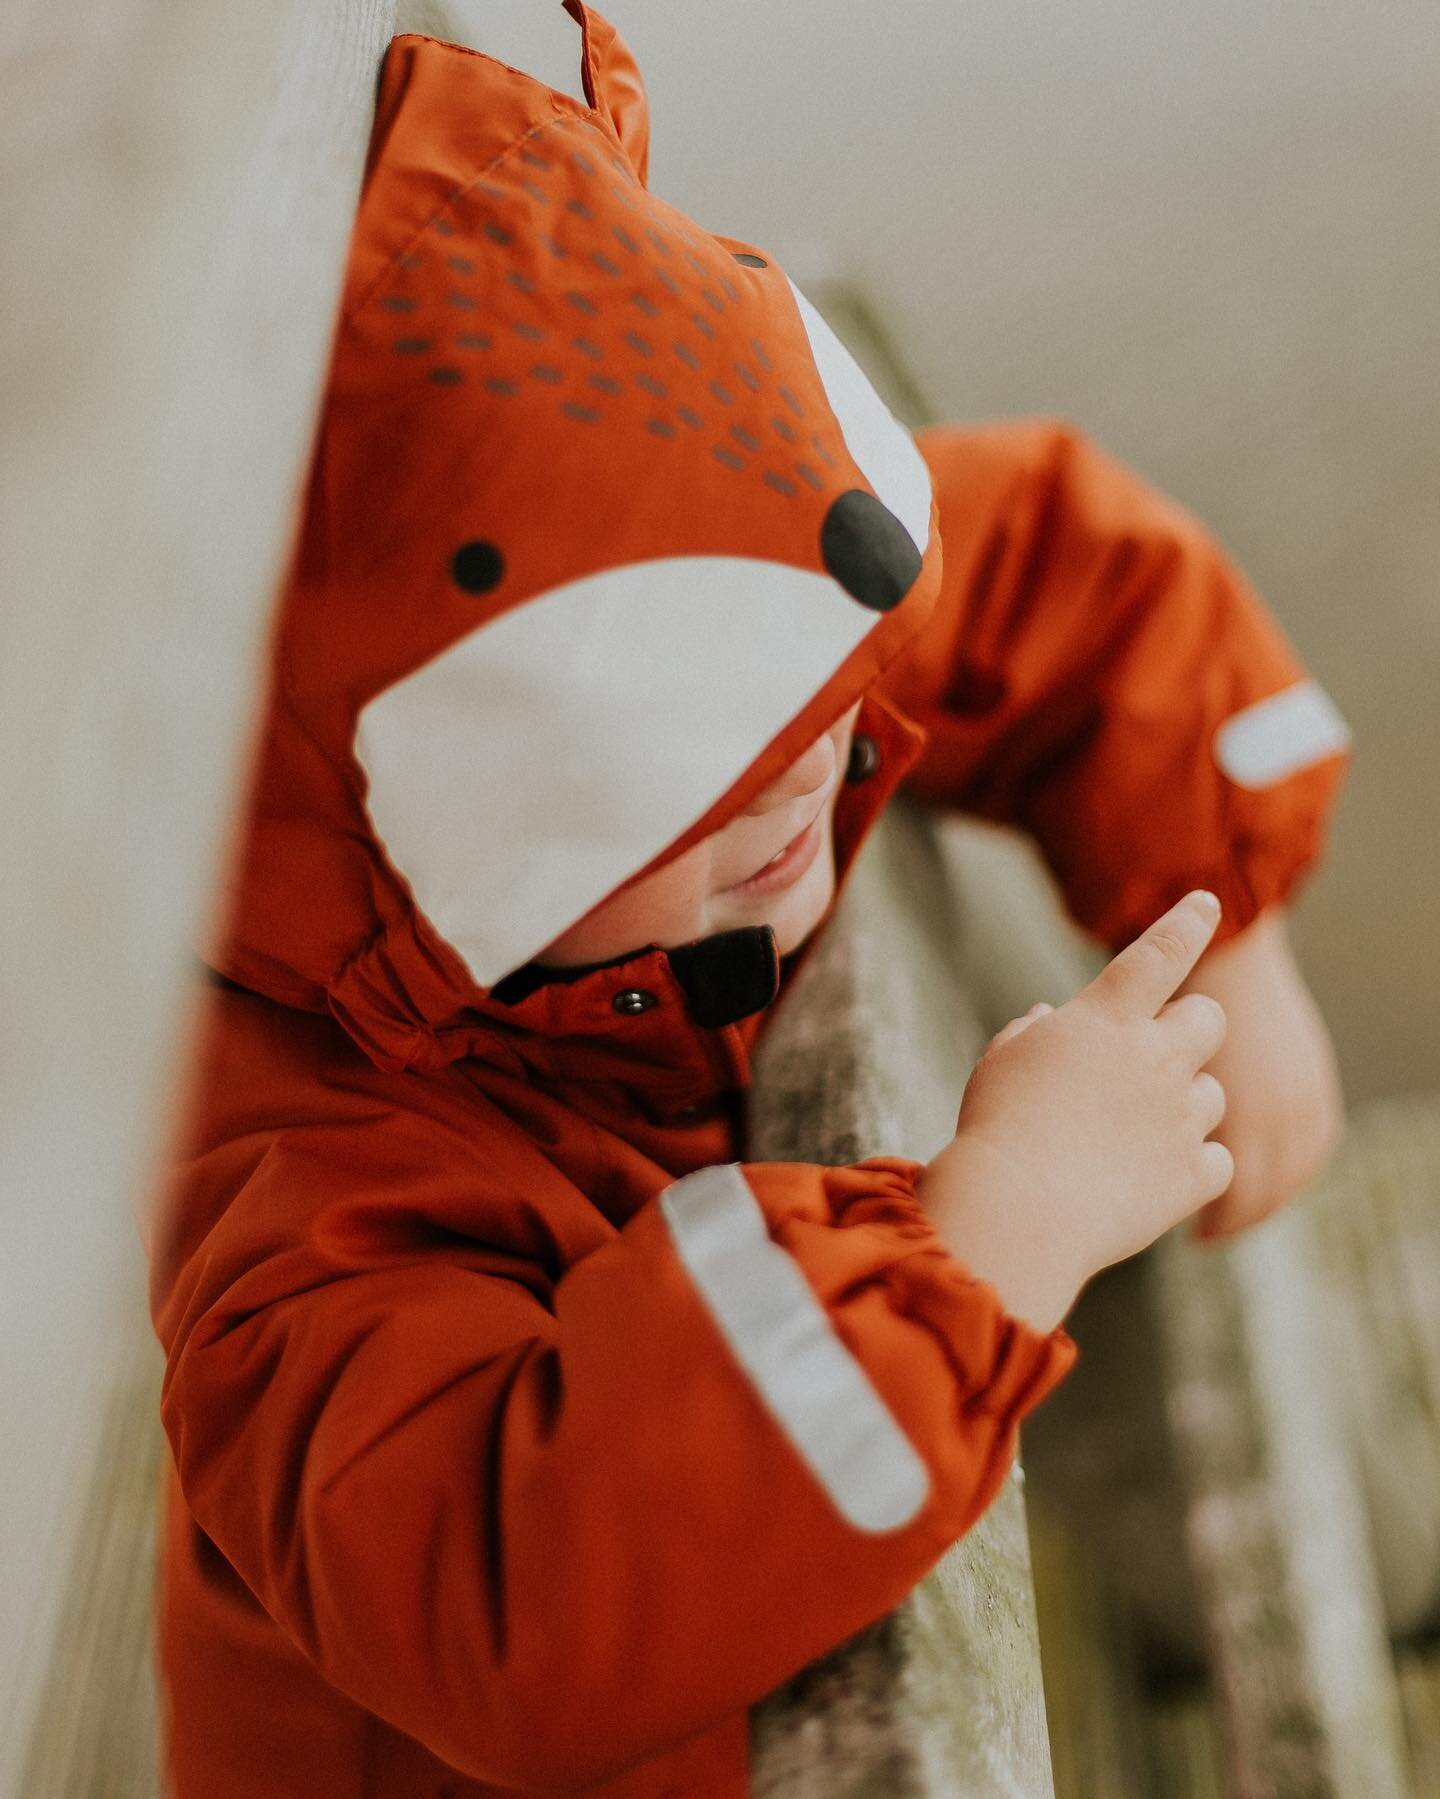 The spookiest day of the year is almost here! What are your child's favorite Halloween activities? 

#healthcare #halloween #childwithautism #sensory #sensorysensitivity #autism #BCBA #behaviortech #therapy #behaviortechnician #autism #ABA #autismawa